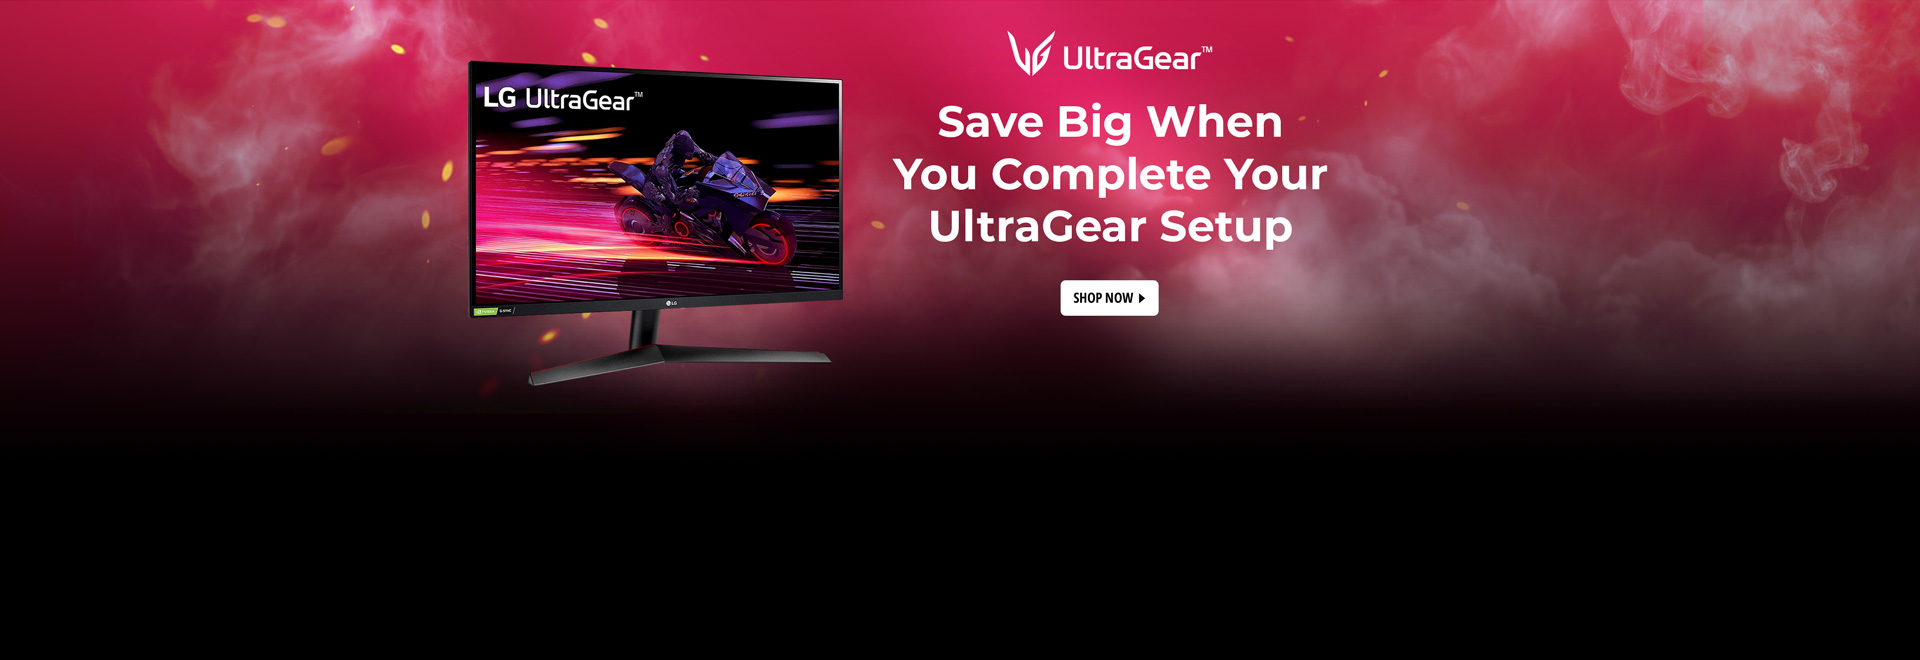 Save Big When You Complete Your UltraGear Setup